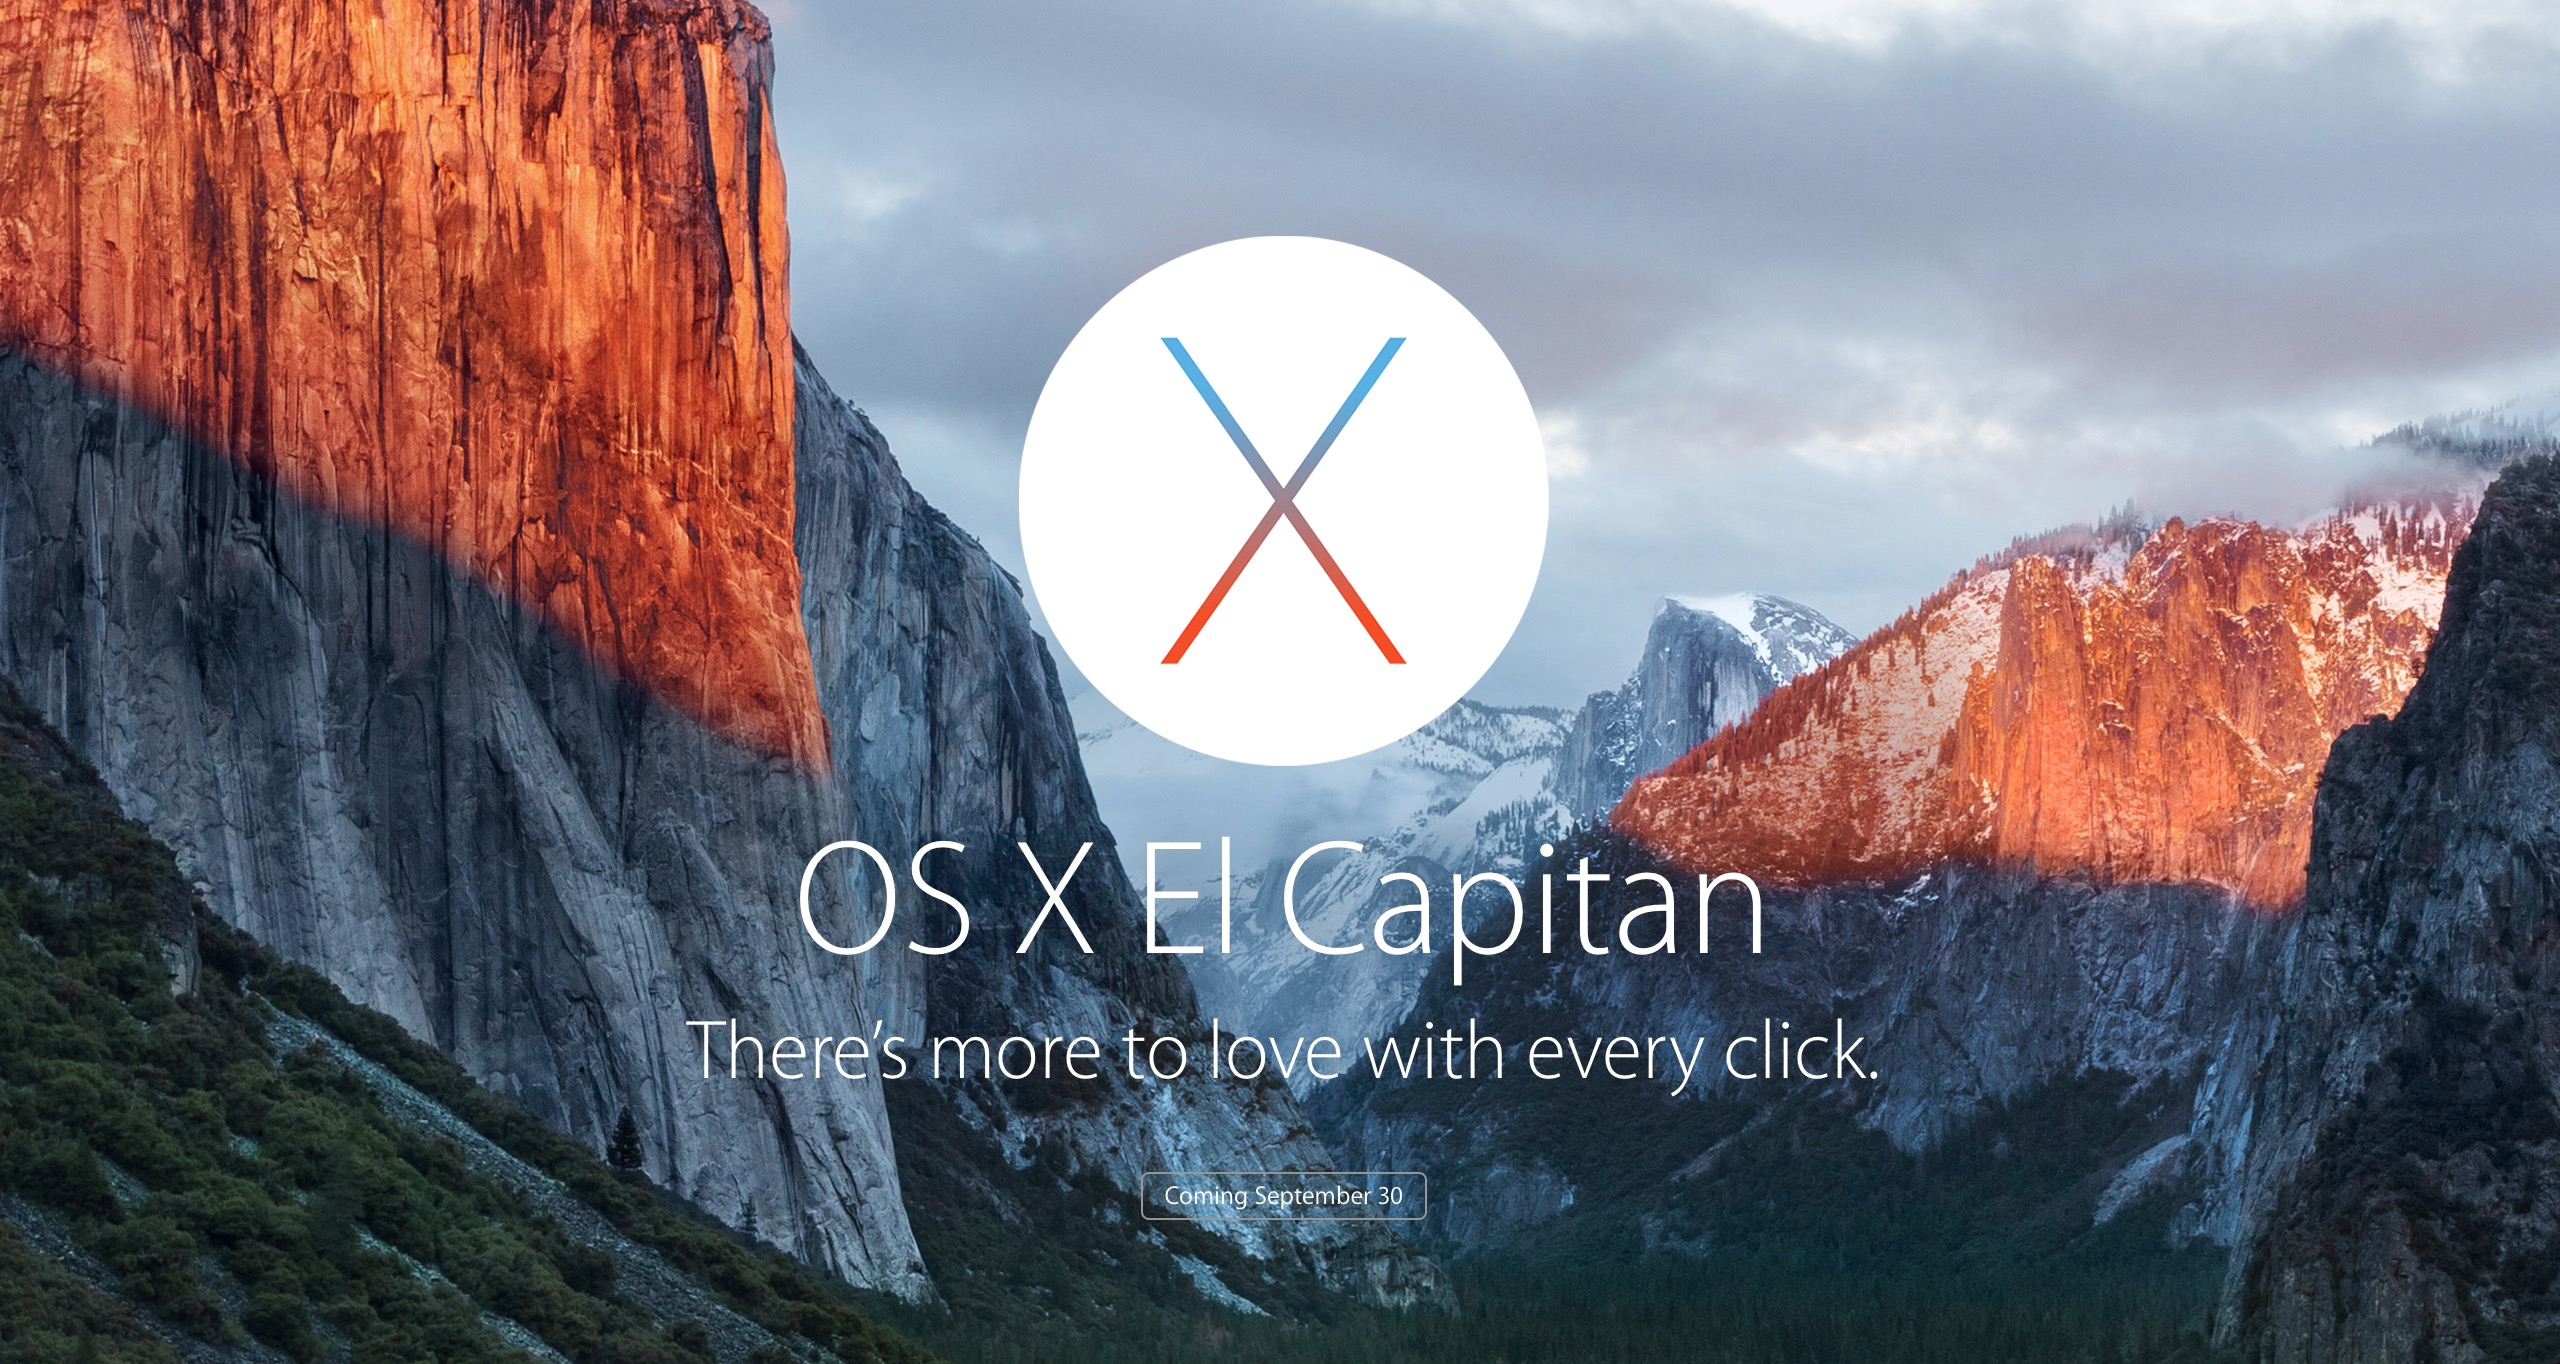 Apple Will Release OS X 10.11 El Capitan on September 30th